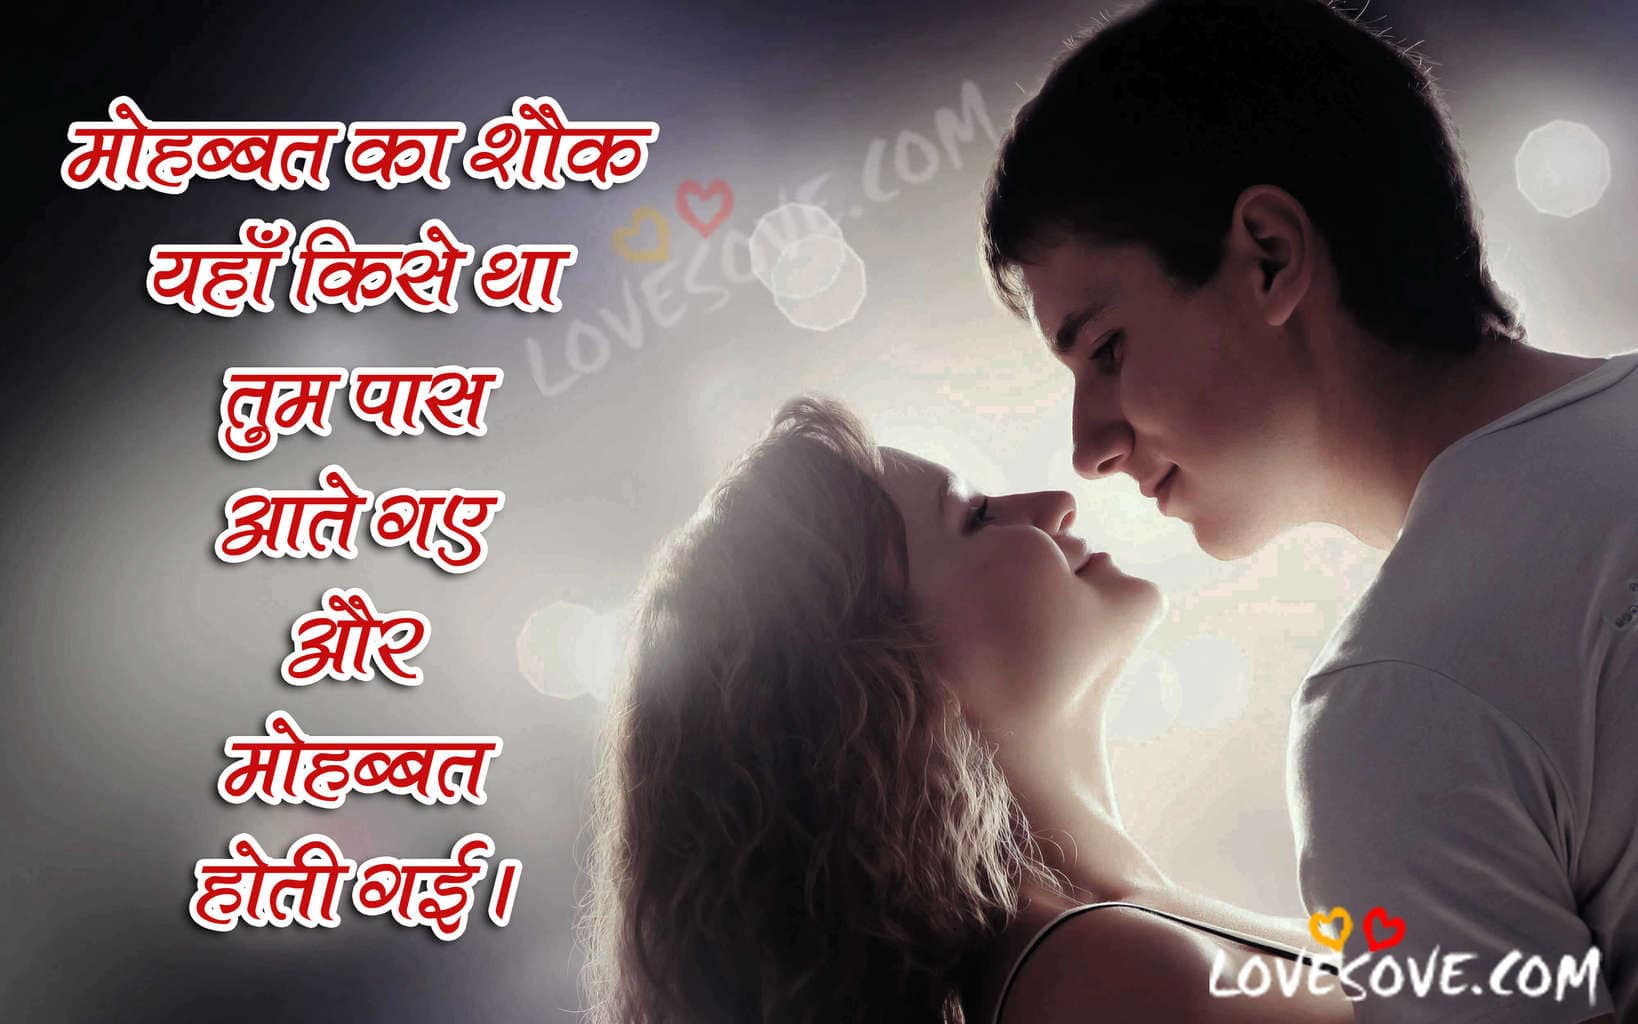 Beautiful love quotes in hindi, love lines in hindi, romantic quotes in hindi, Hindi Love lines, Love Romantic Shayari, Hindi Quotes On Love